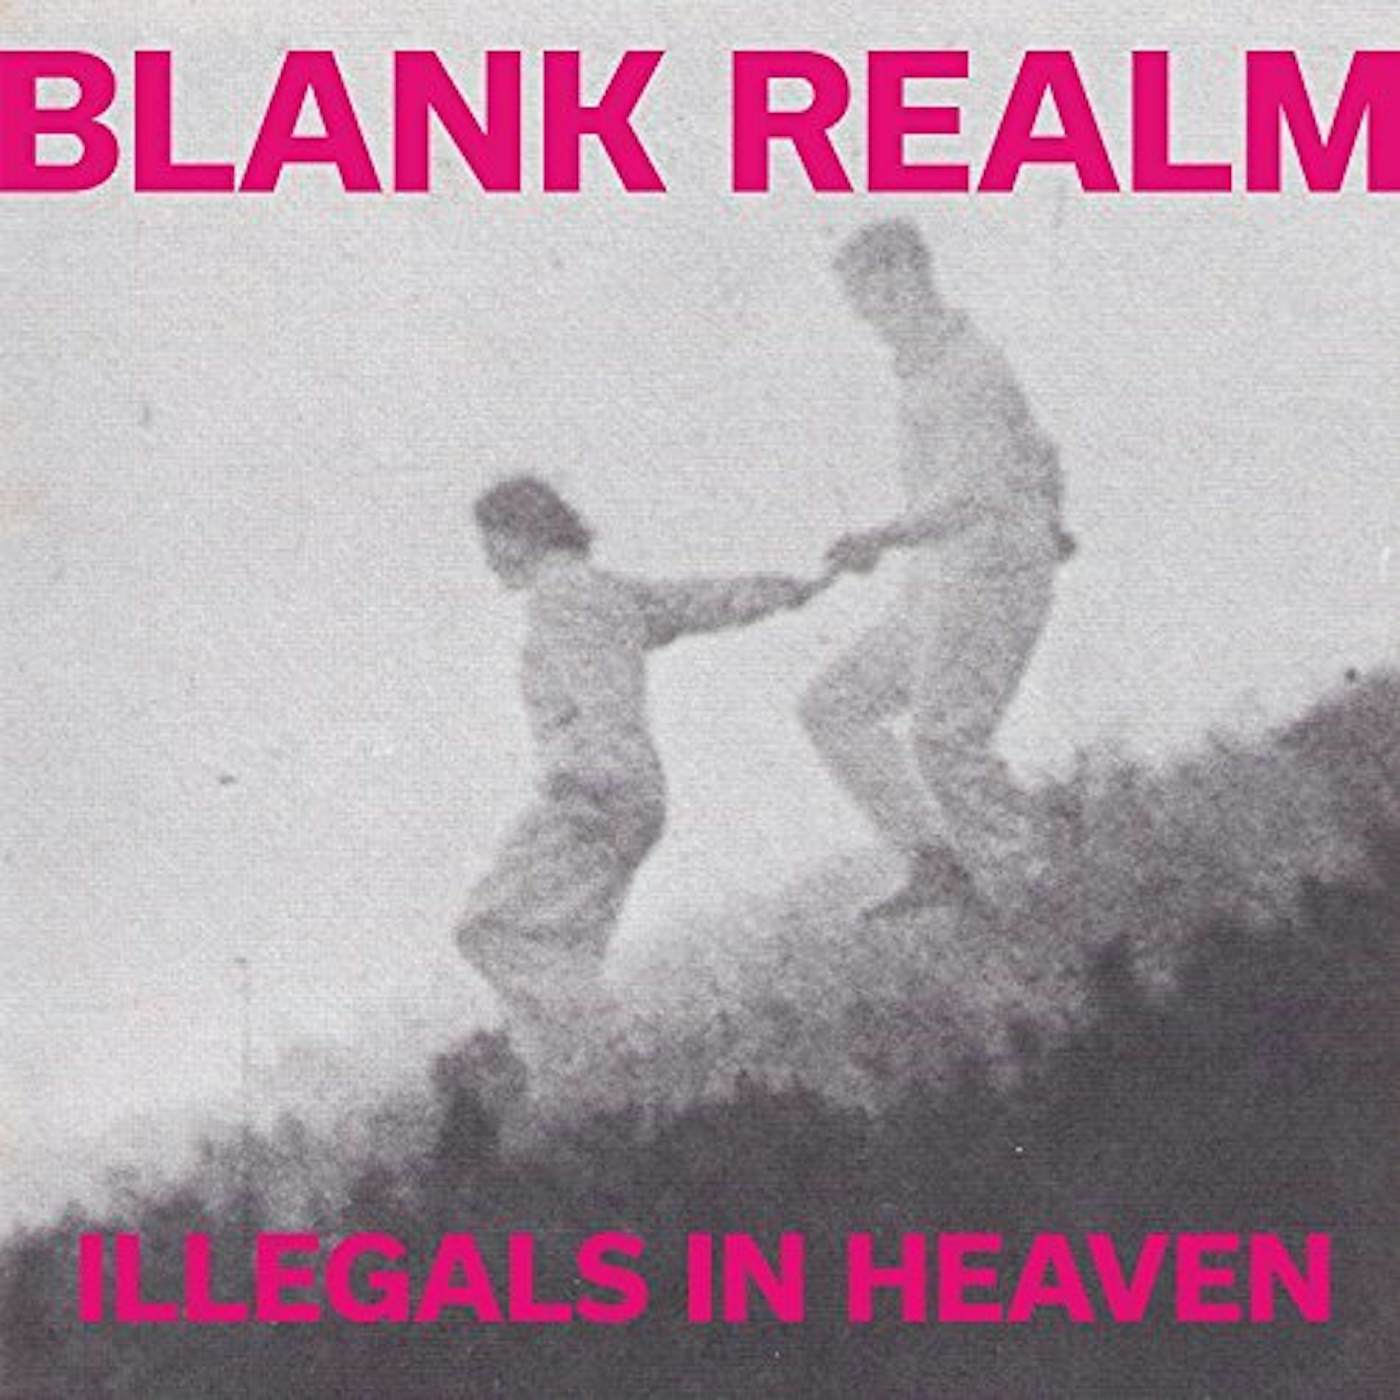 Blank Realm Illegals in Heaven Vinyl Record